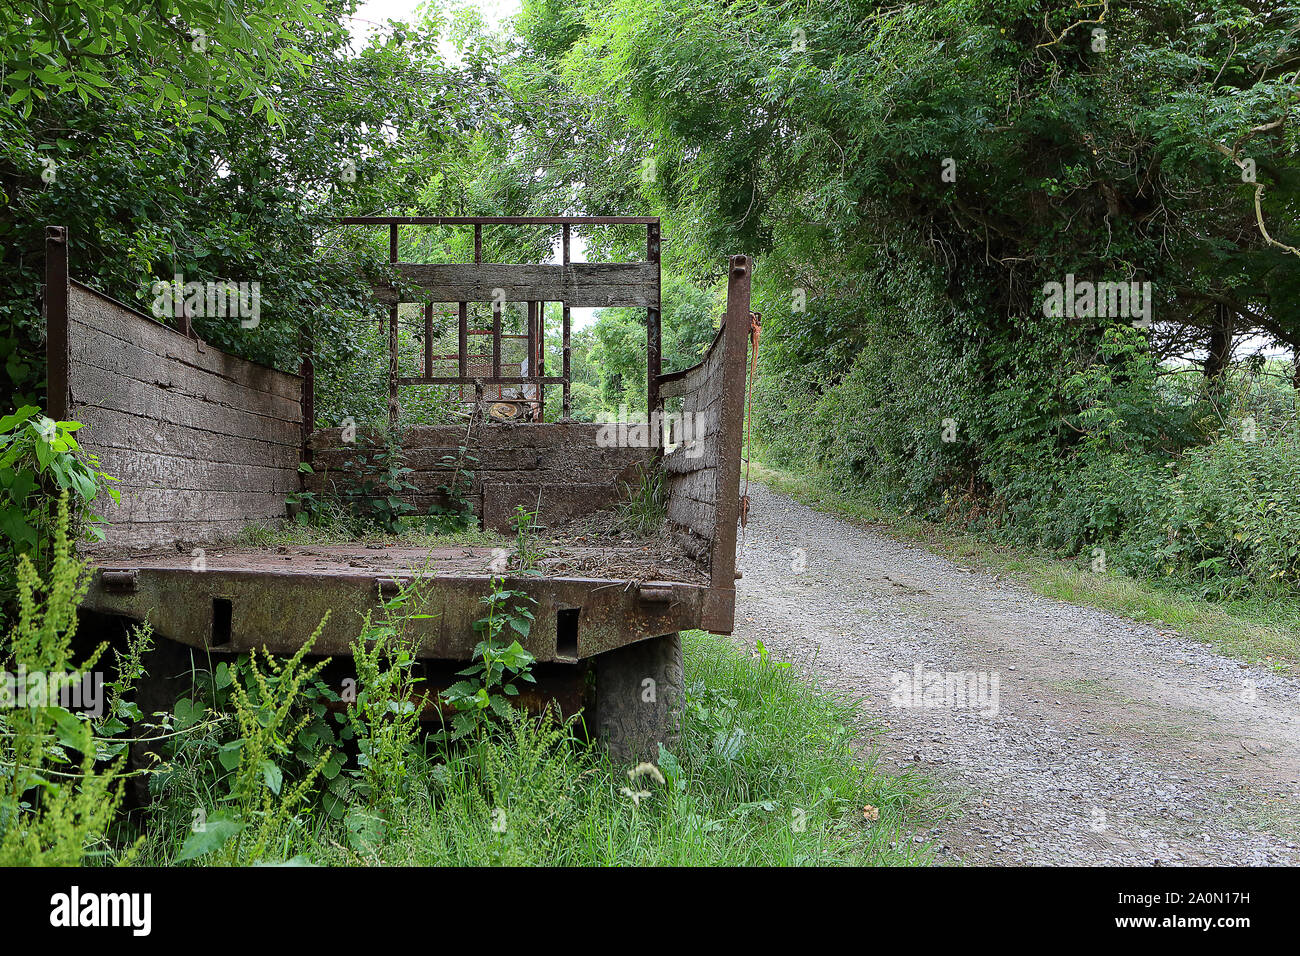 Old hay trailer in country lane Stock Photo